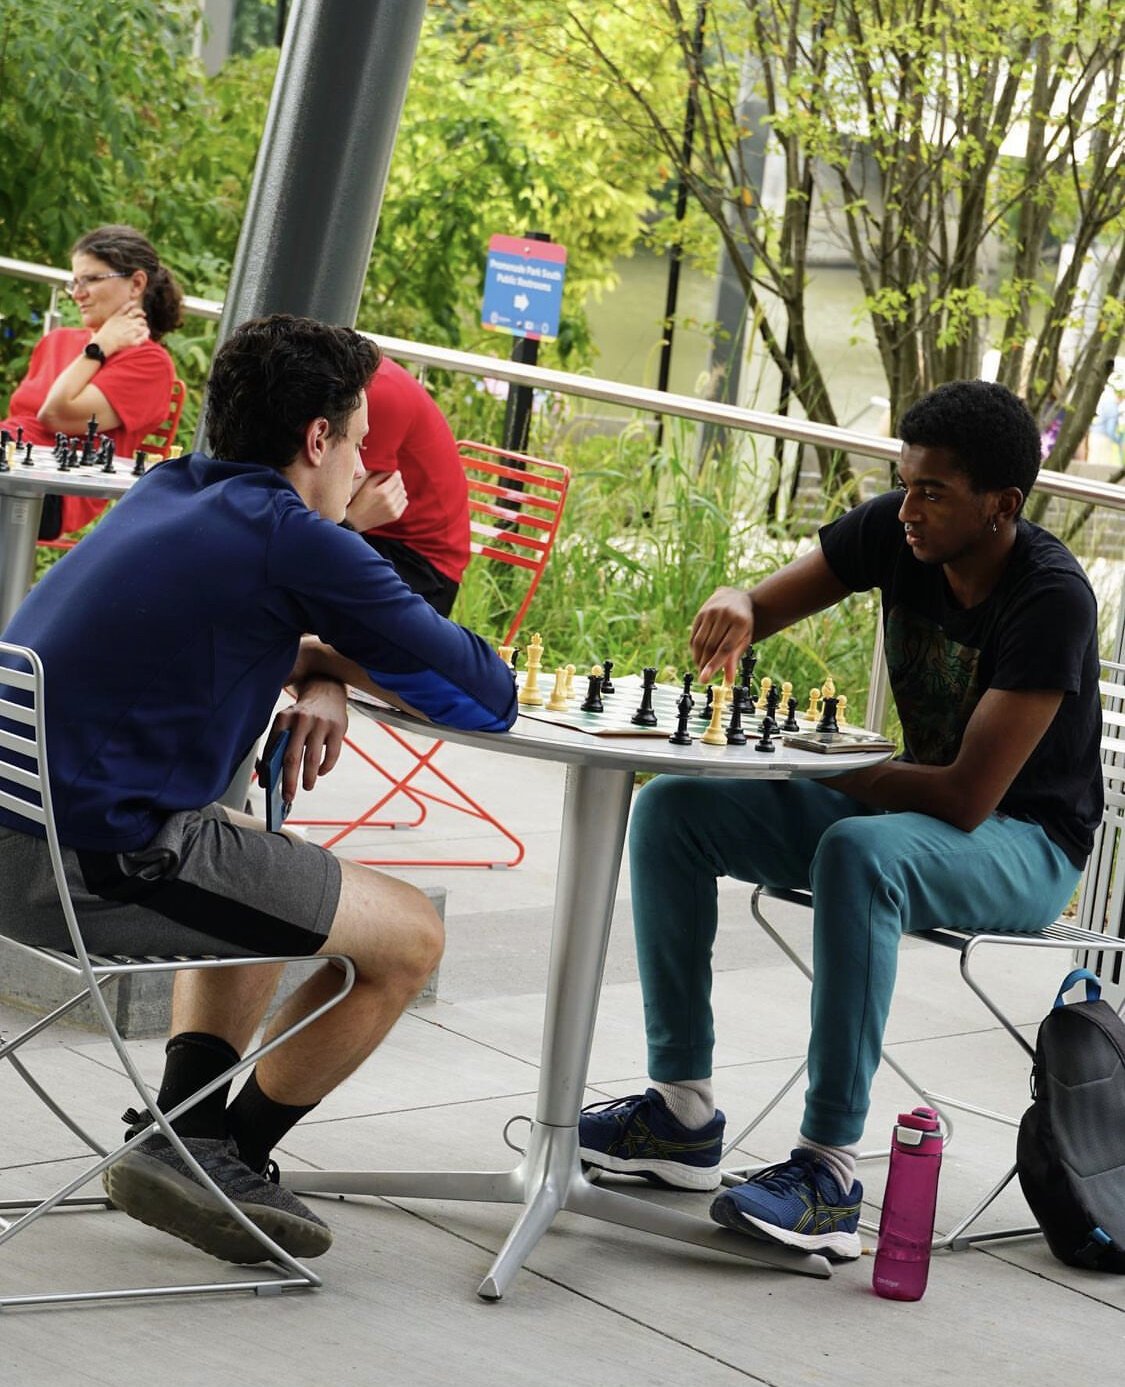 Community Chess at Promenade Park has become a popular, free event for locals.